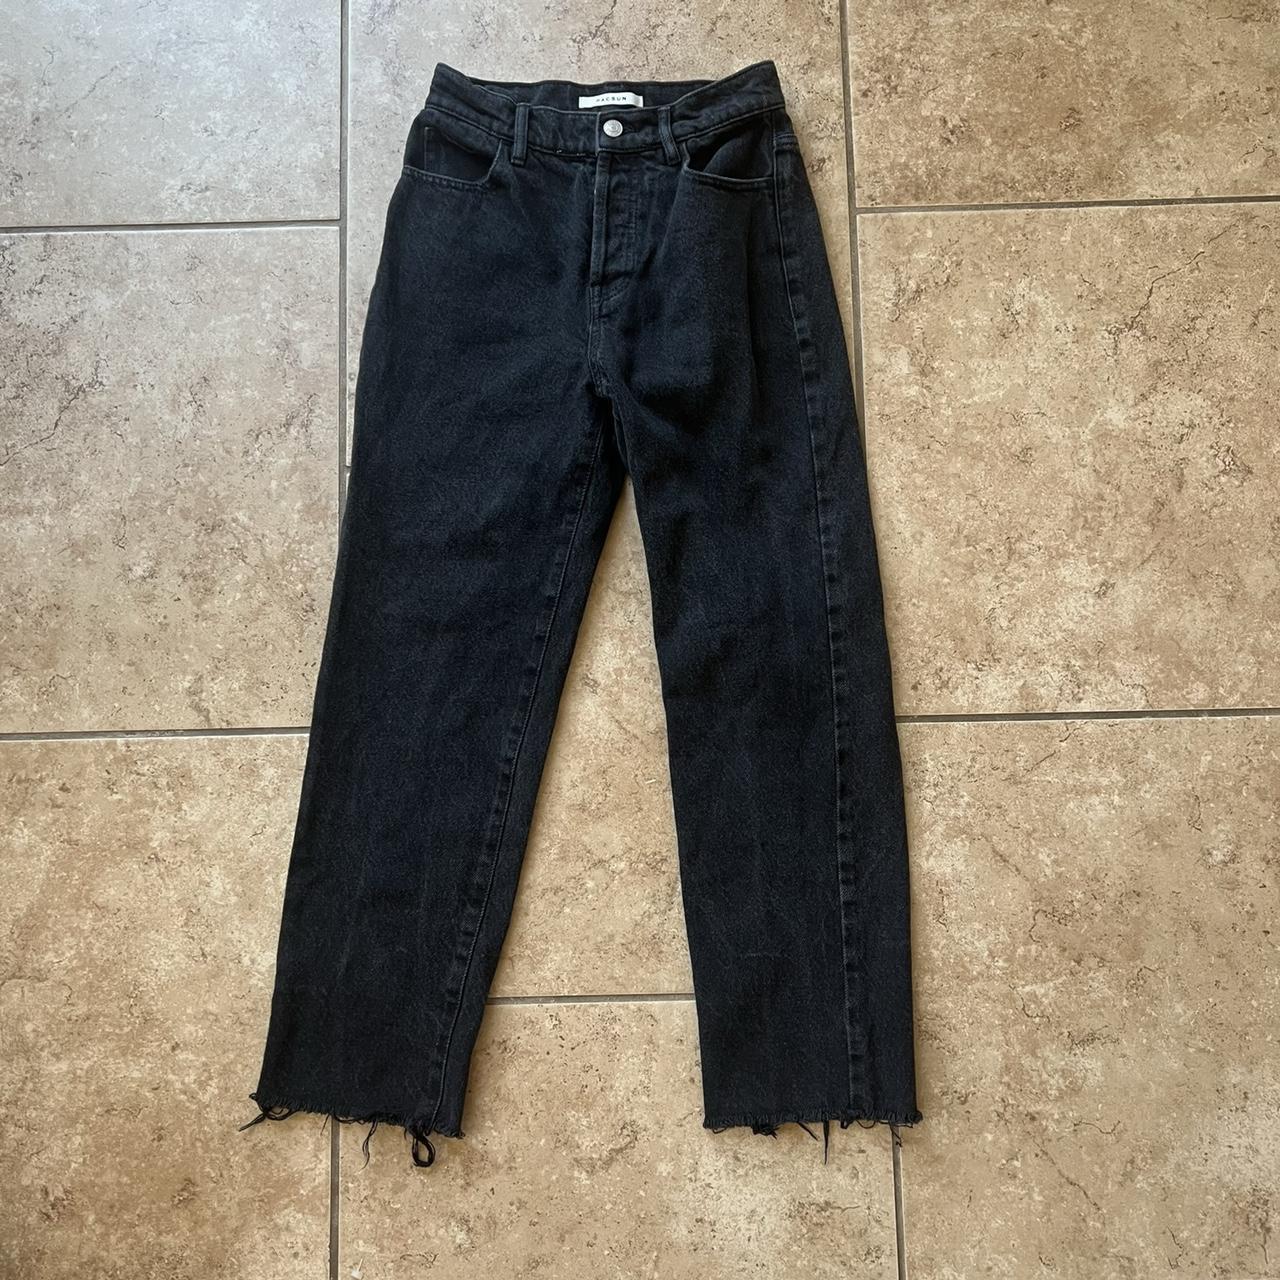 pacsun high rise straight jeans size 24 - Depop